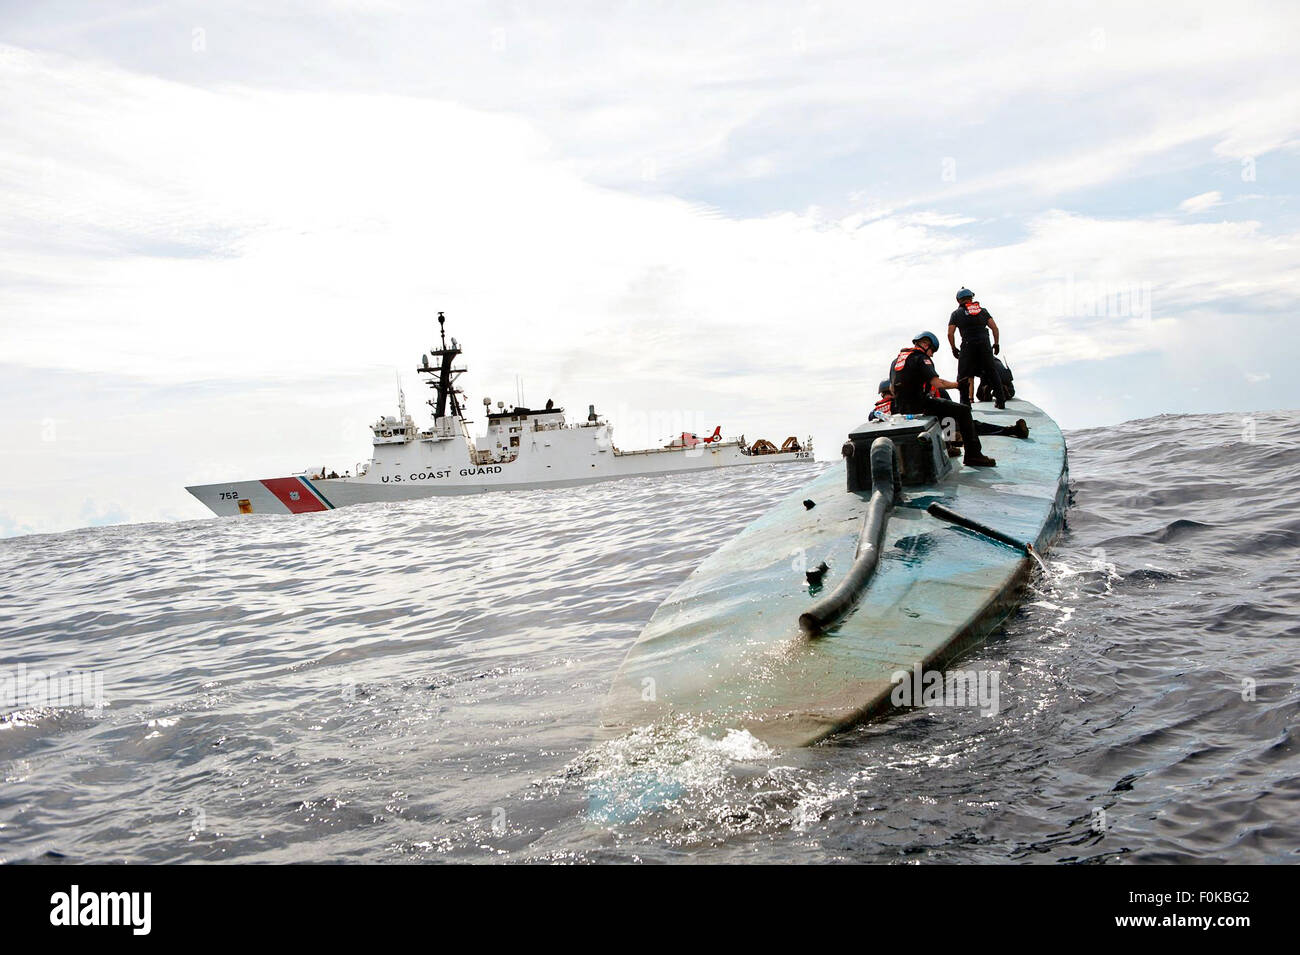 A US Coast Guard boarding team from the USCG Cutter Stratton investigates a self-propelled semi-submersible submarine carrying 6 tons of cocaine interdicted in international waters July 19, 2015 off the coast of Central America. Stock Photo